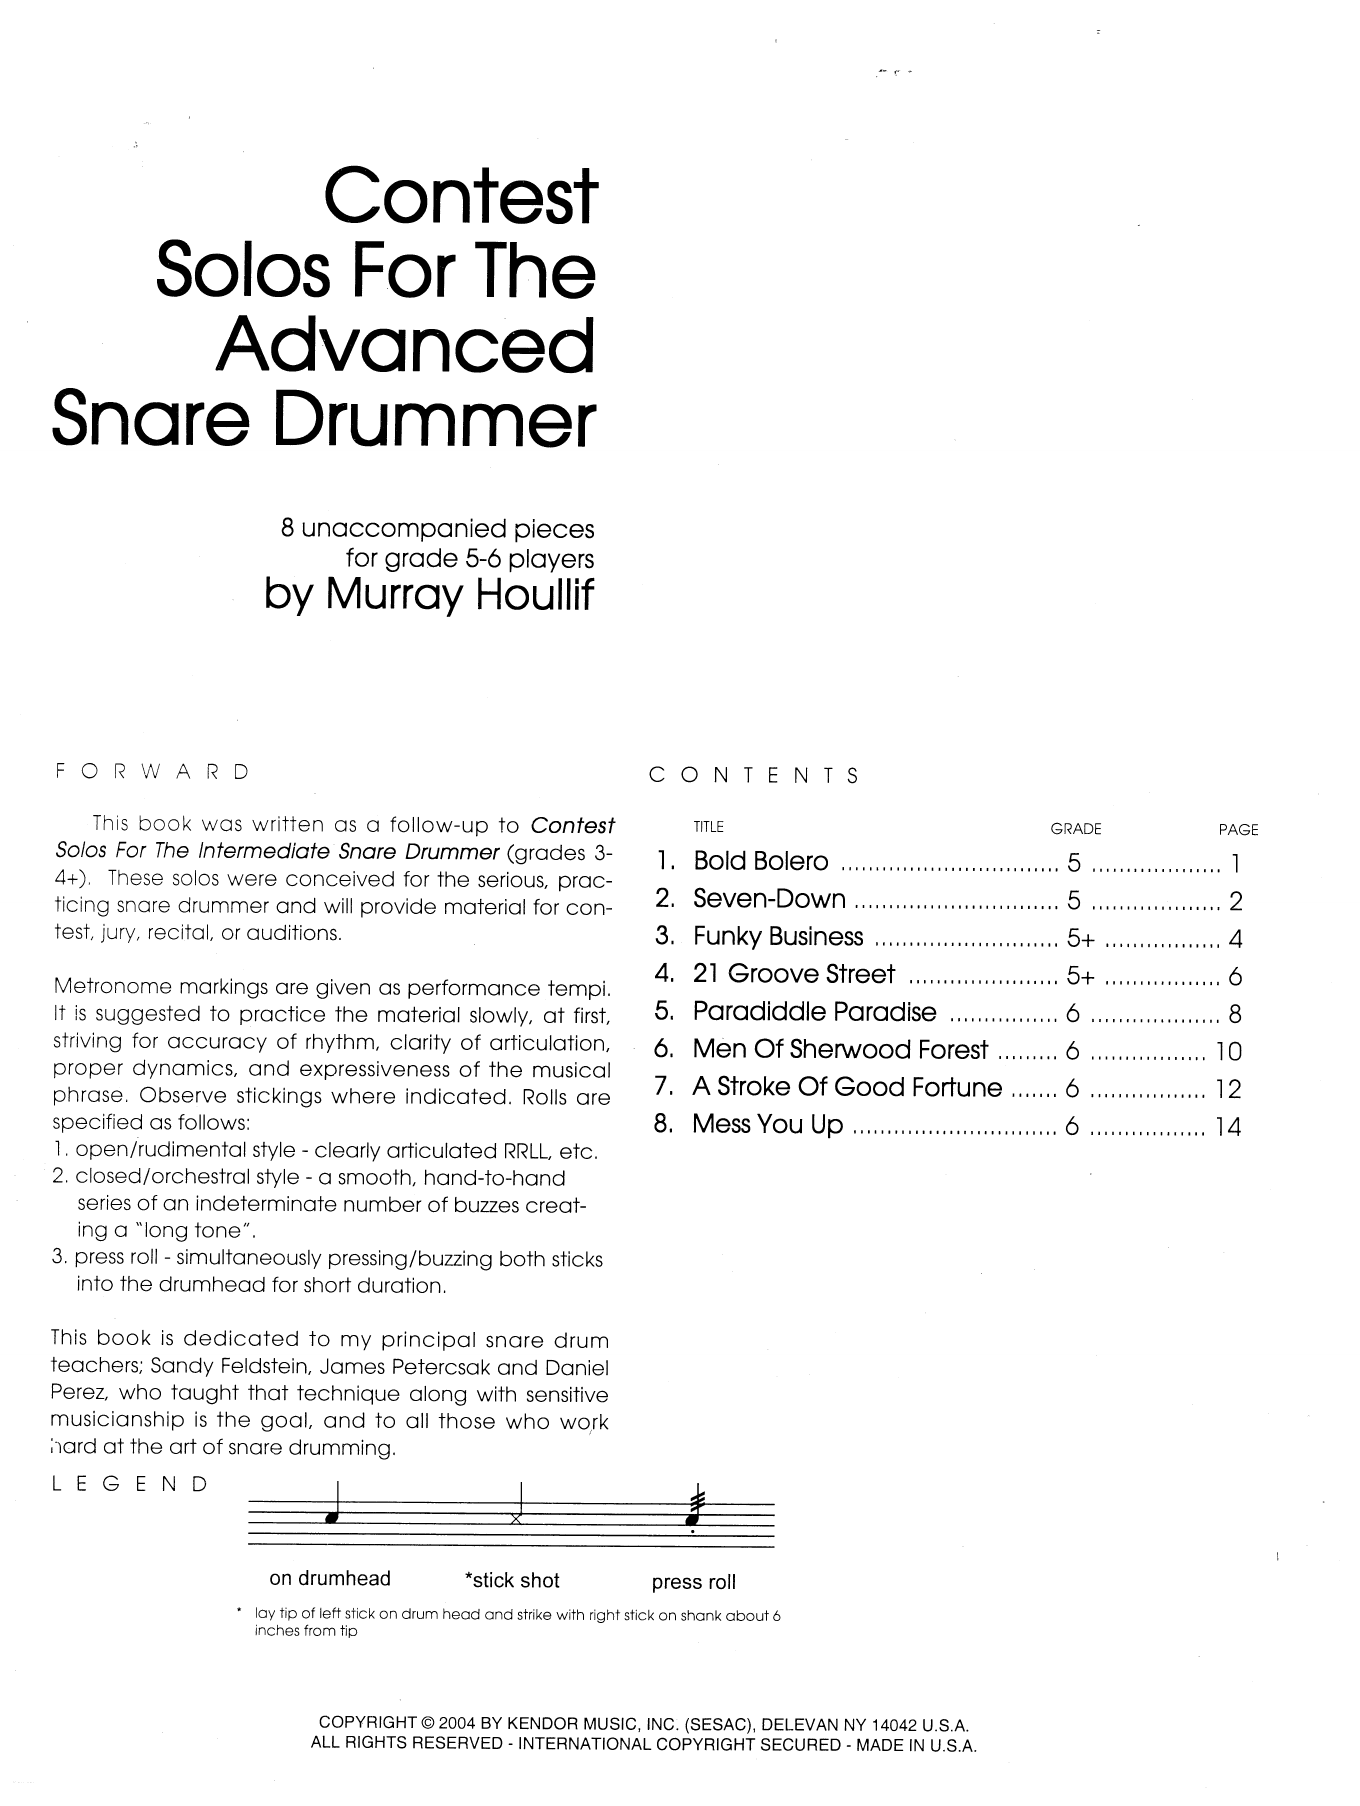 Download Murray Houllif Contest Solos For The Advanced Snare Dr Sheet Music